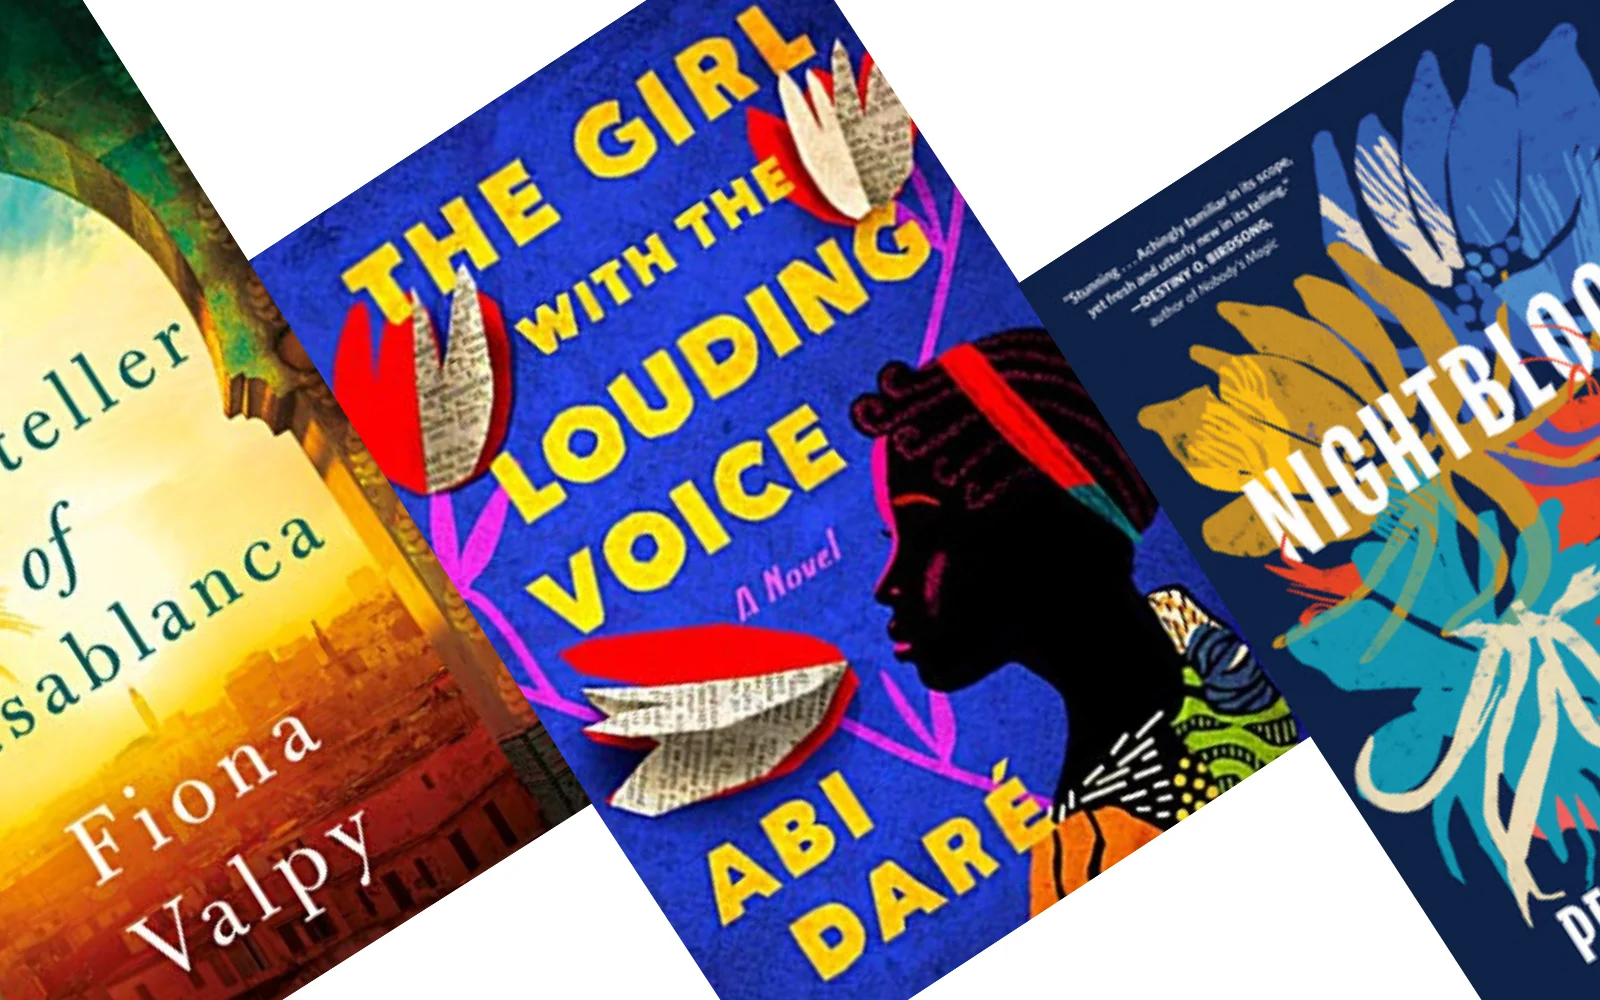 Covers of three highly rated Books Set in Africa, with The Girl With the Louding Voice in the center